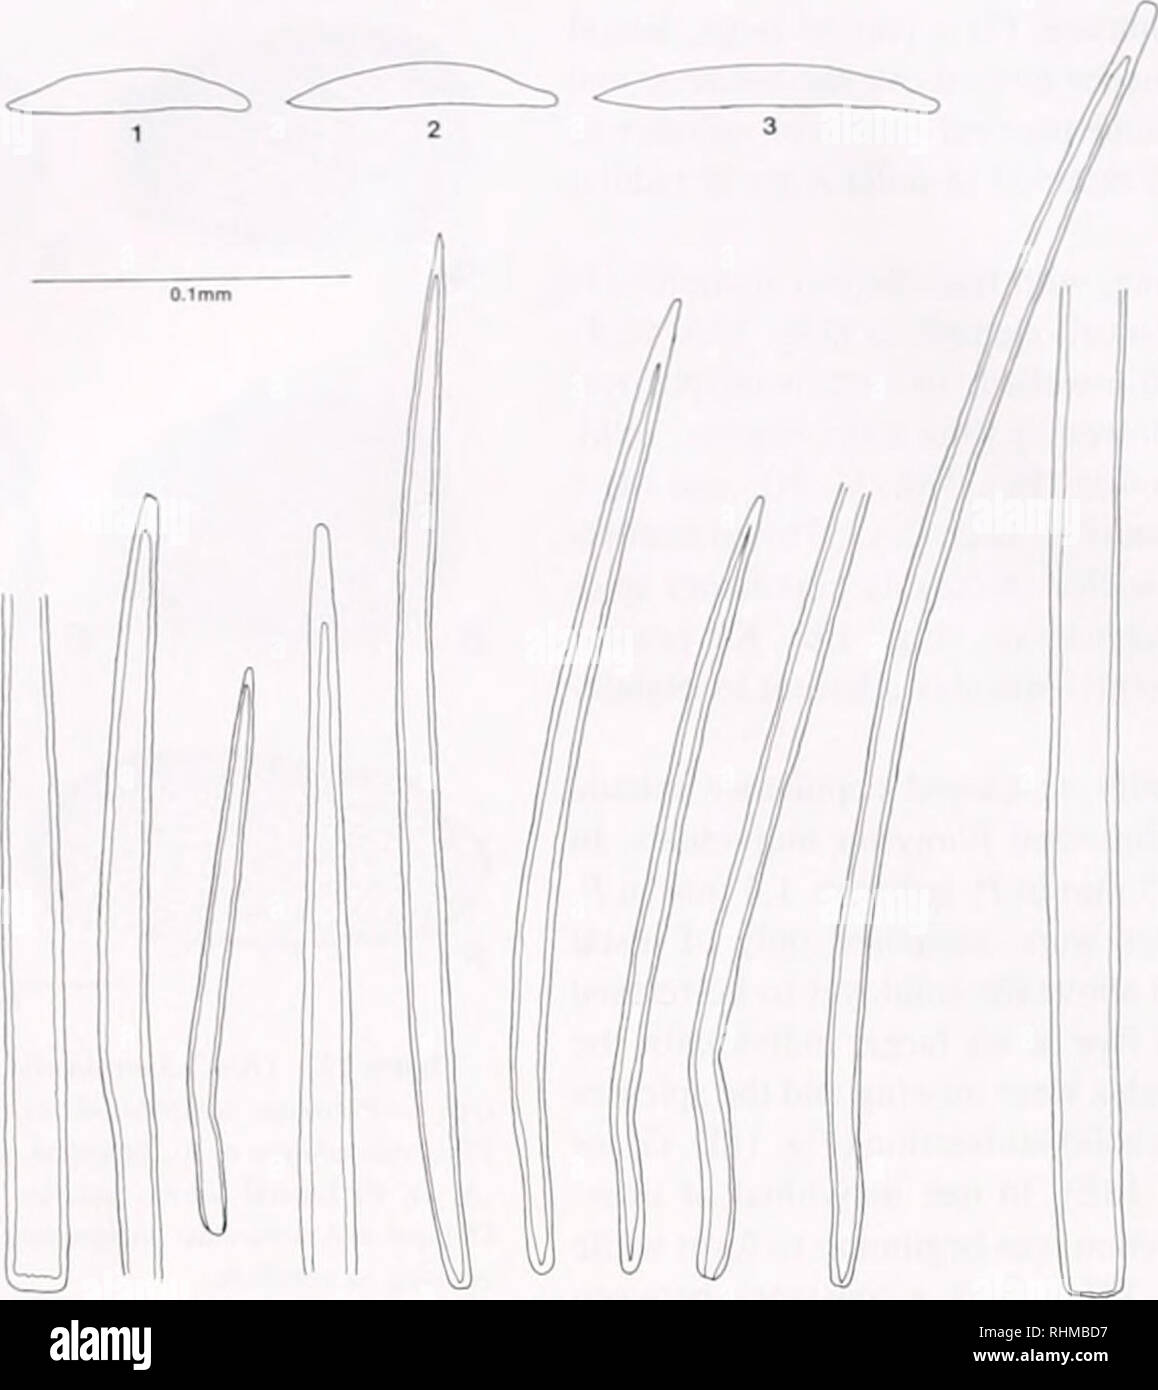 . The Biological bulletin. Biology; Zoology; Biology; Marine Biology. 140 A. H. SCHELTEMA AND C. SCHANDER. 4567 8 9 10 11 12 13 14 Figure 16. Upidermal spicules ol I'hiwcmu species. I, 4-7. Siinrnthii-llii schizoradulata .Salvini-Plawen (=PlriiJultit&lt;n: spicules 4-6. lectotype; 1, 7. paralectotype. Pluwcnia phticni n. sp.: spicules 2. 8-11, paralype 1. P. un;li&lt;if. MNHNP (alcohol specimen, spicule slide): Length 2.4 mm, greatest height anil width 1.7 and 1.9 mm, respectively. West European Basin. 57 59.7'N. I()°39.8'W, 2091 m (INCAL |( I YIOHI. DS-OI. LS.vii. 1976). Illustratedparatypes Stock Photo